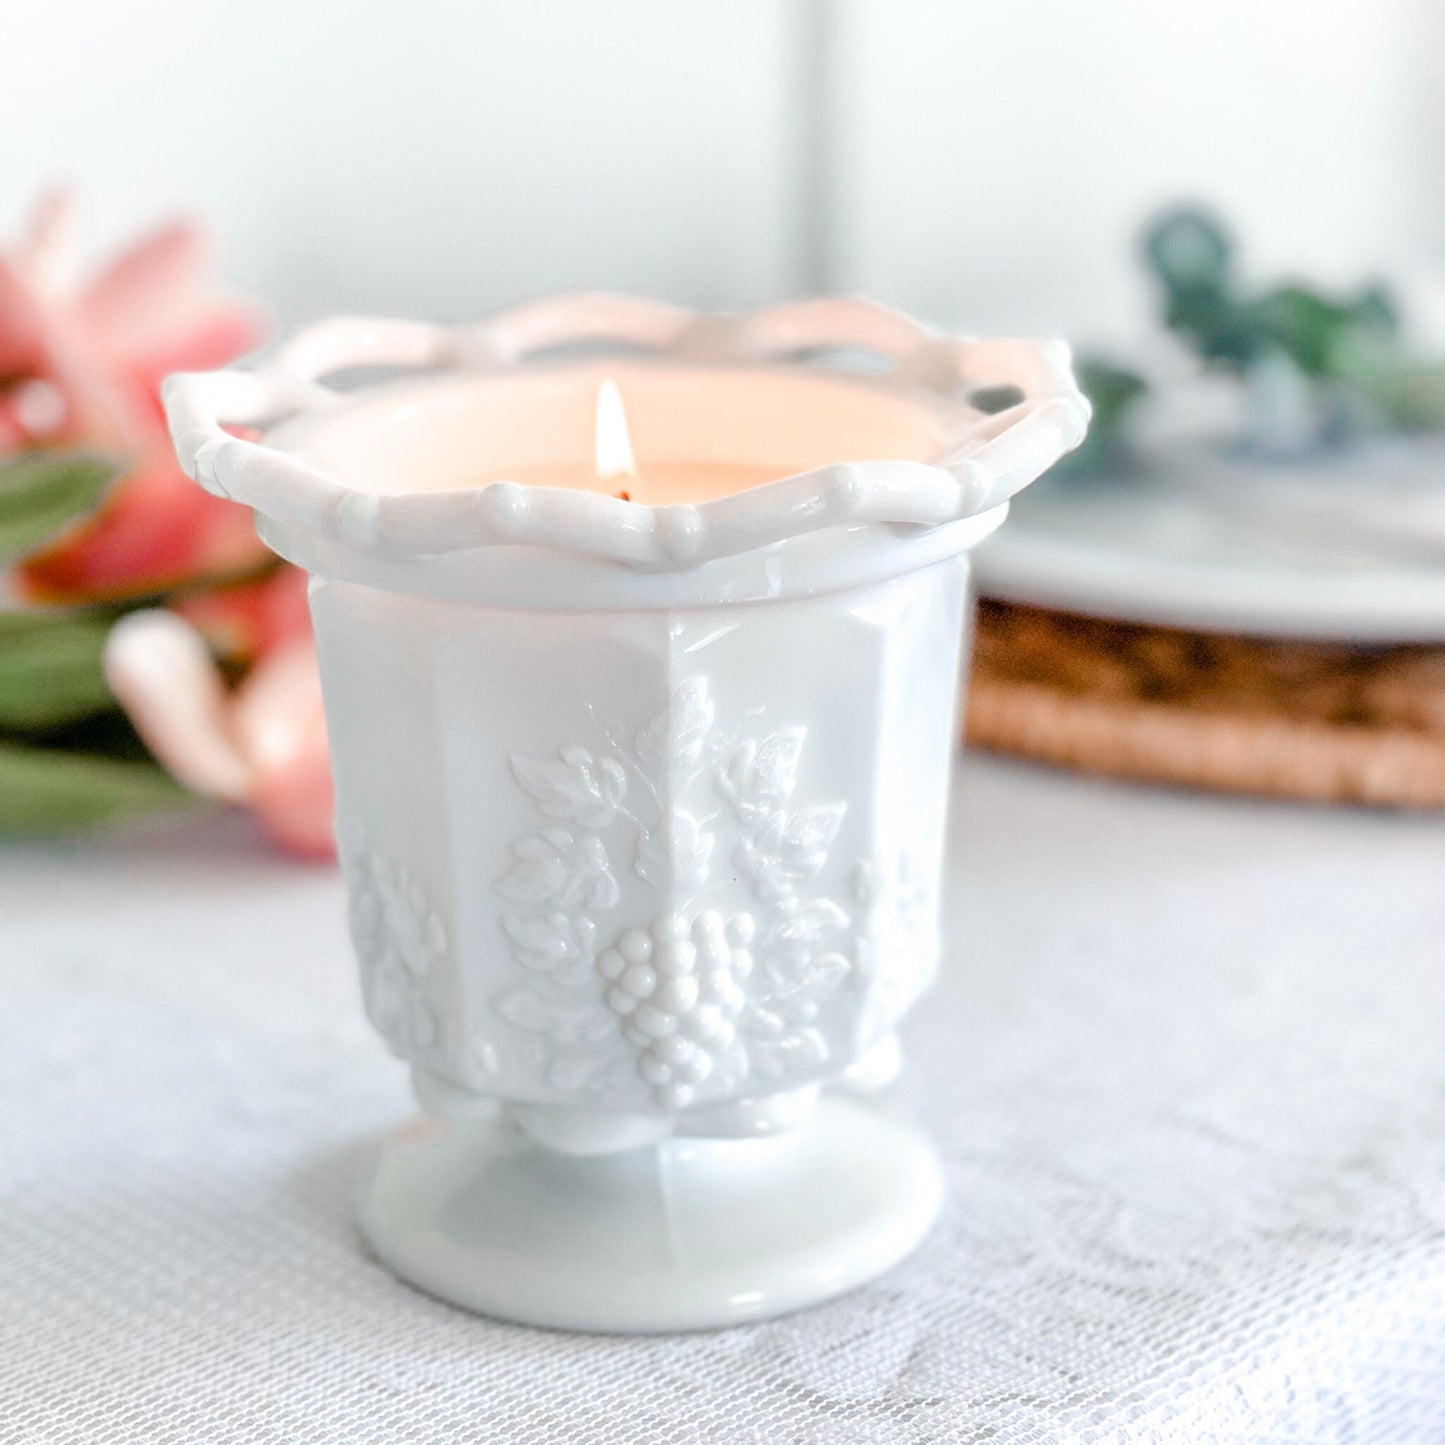 Scented Candle in Vintage Sugar Dish